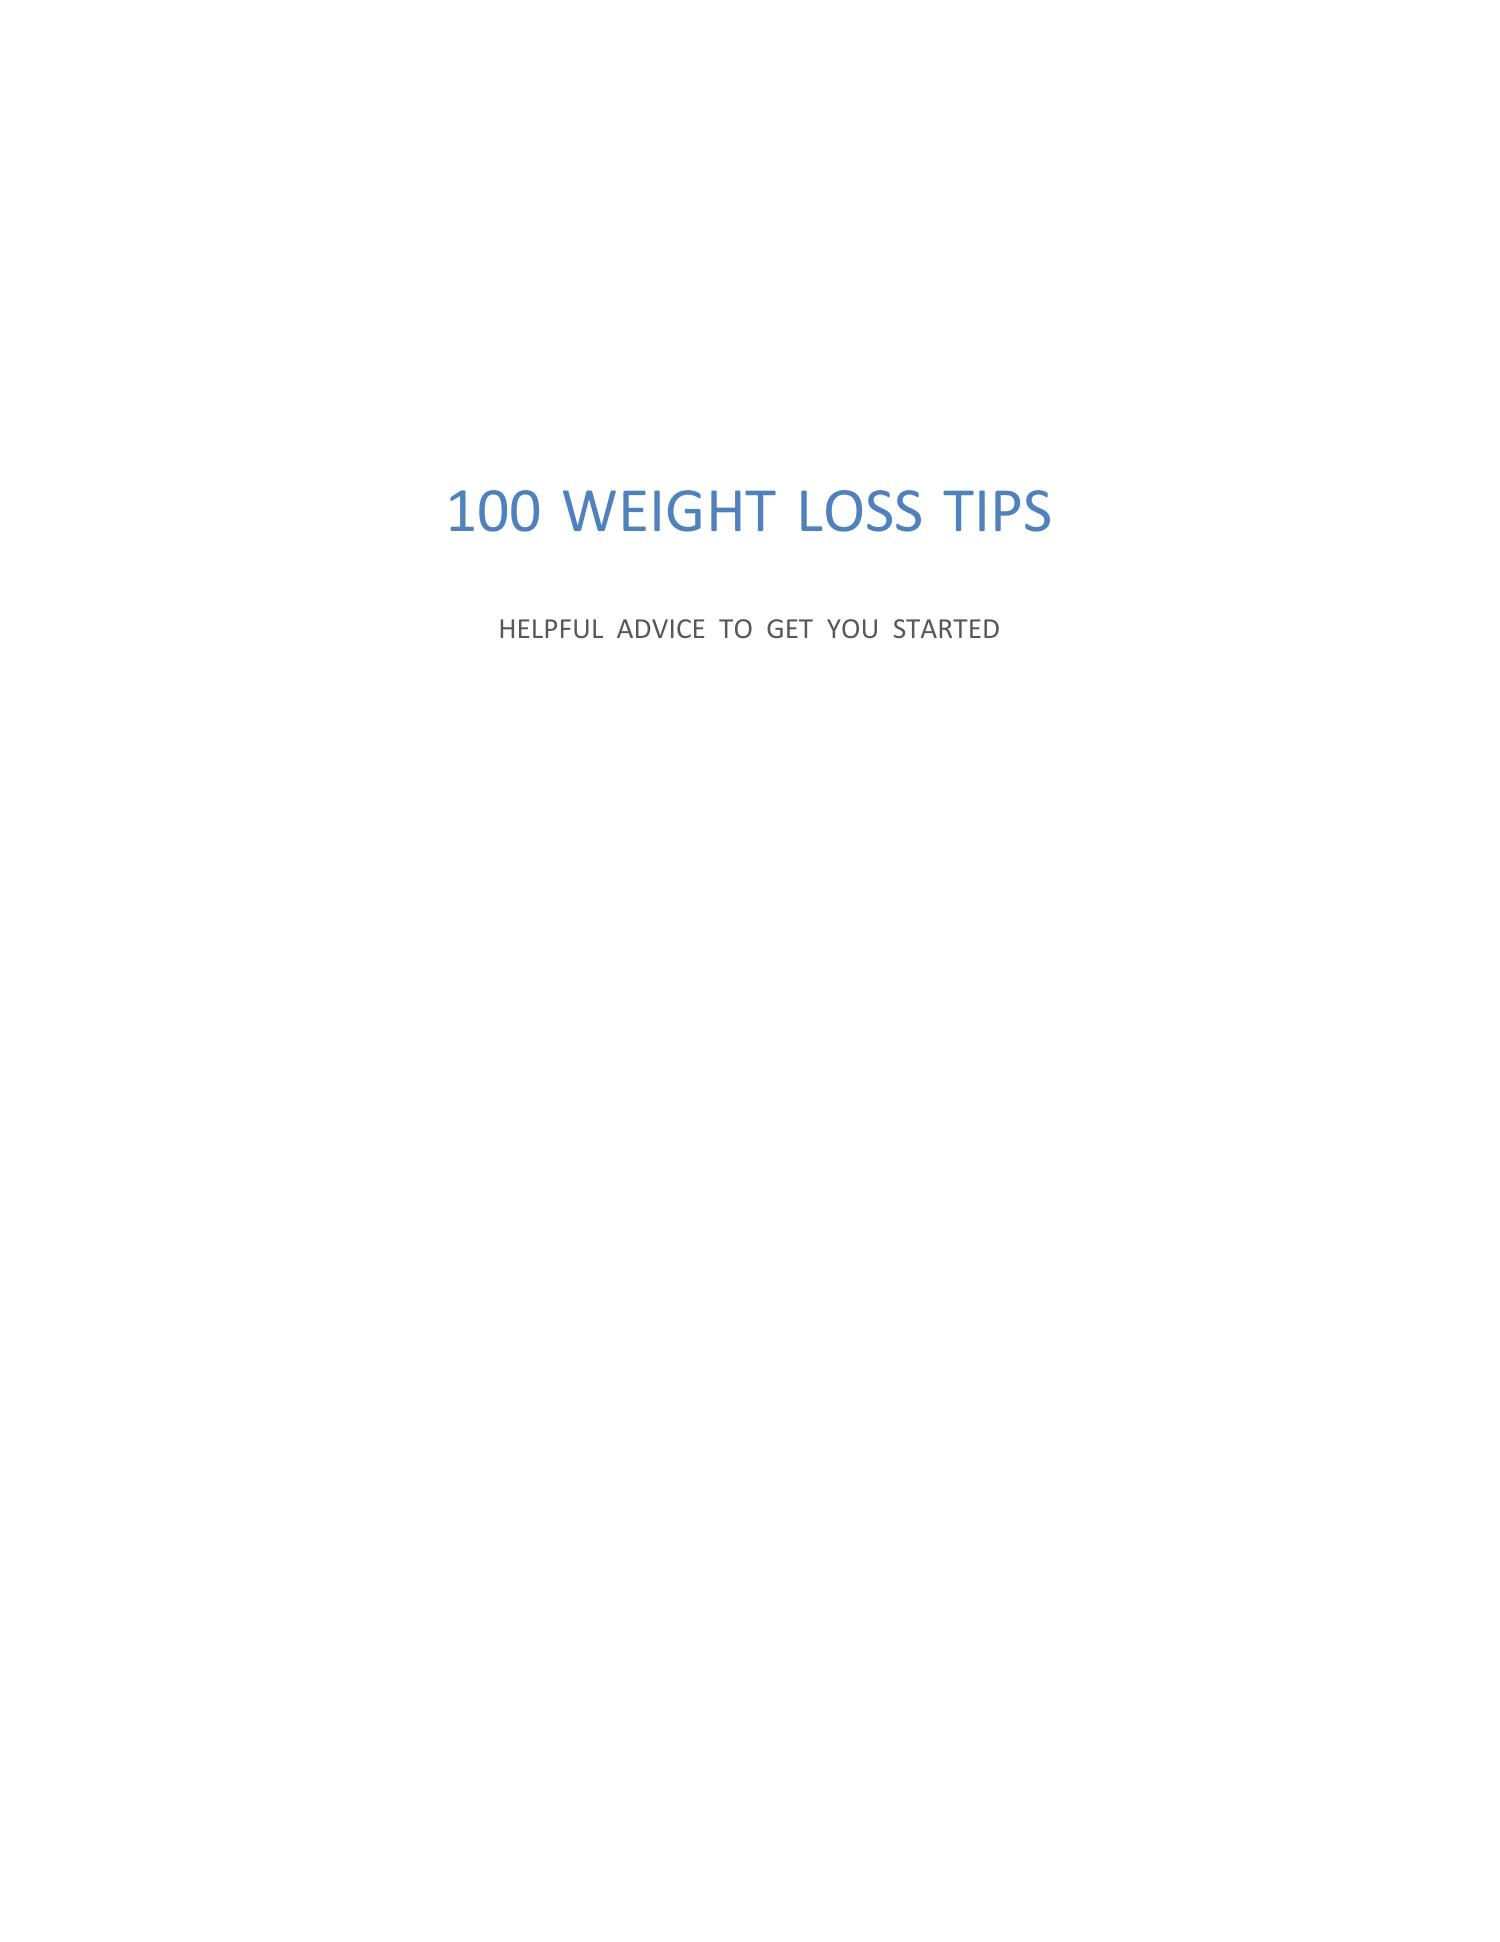 100 Weight Loss Tips.pdf | DocDroid